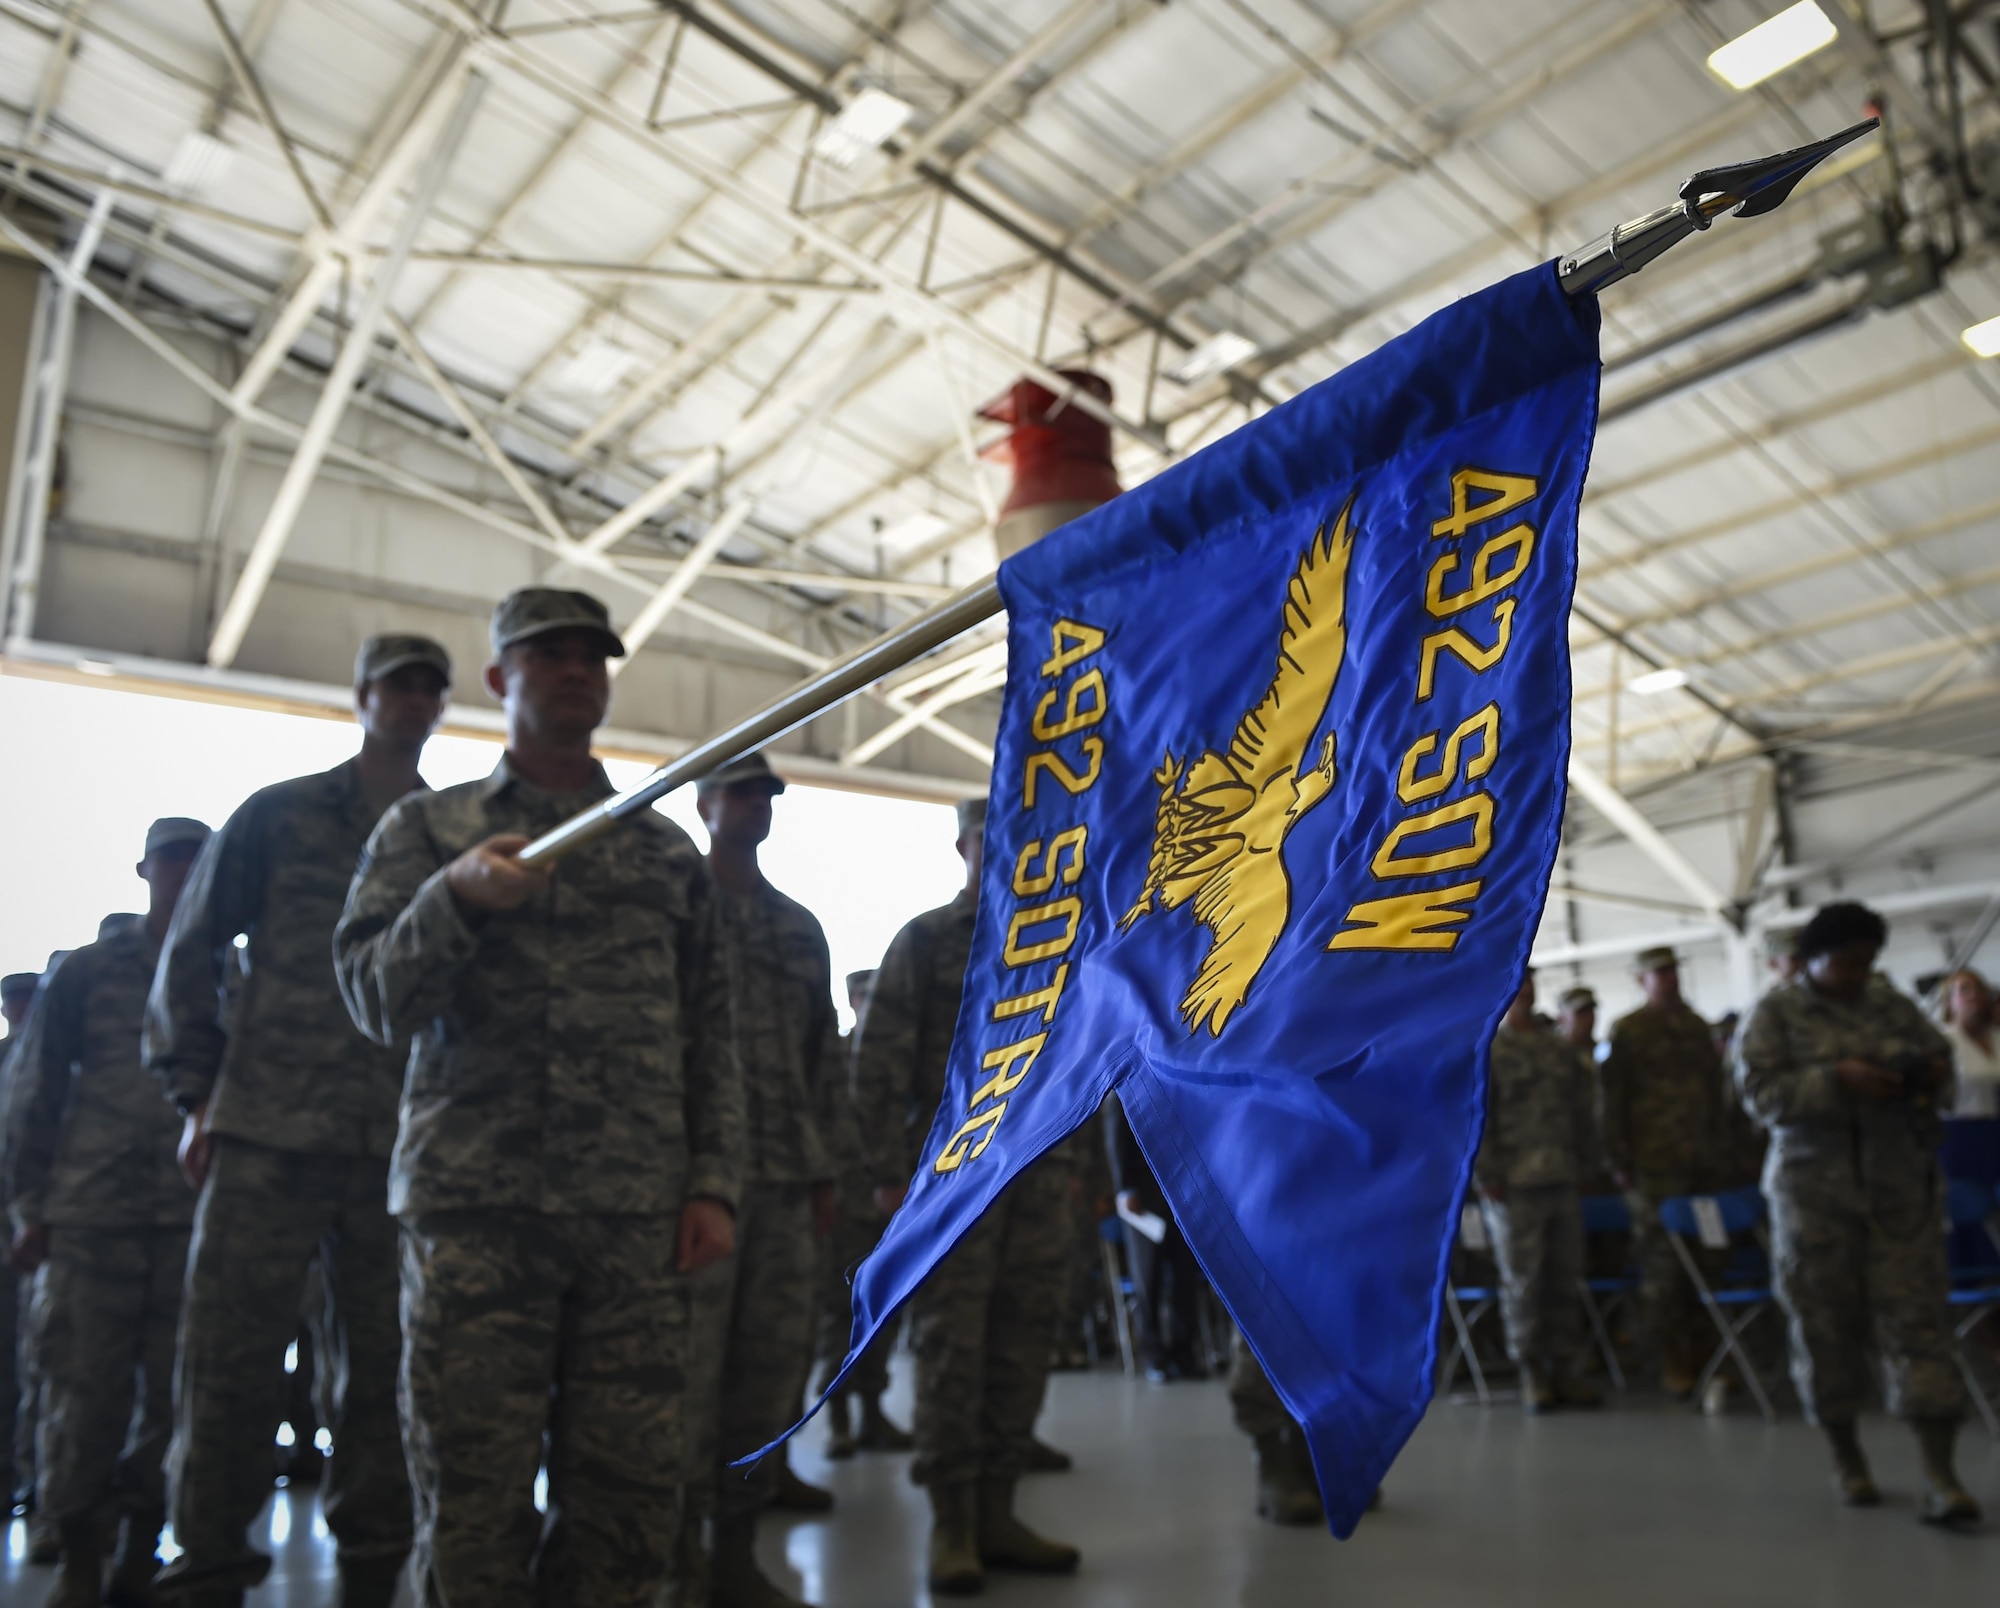 Air Commandos attend the 492nd Special Operations Wing activation ceremony at Hurlburt Field, May 10, 2017. The designator for the 492nd SOW dates back to WWII when the 801st Bombardment Group was established at Harrington Field, England, in September 1943. Almost a year later, it would be redesignated as the 492nd Bombardment Group, a cover for their secret mission—Operation Carpetbagger. (U.S. Air Force photo by Airman 1st Class Joseph Pick)